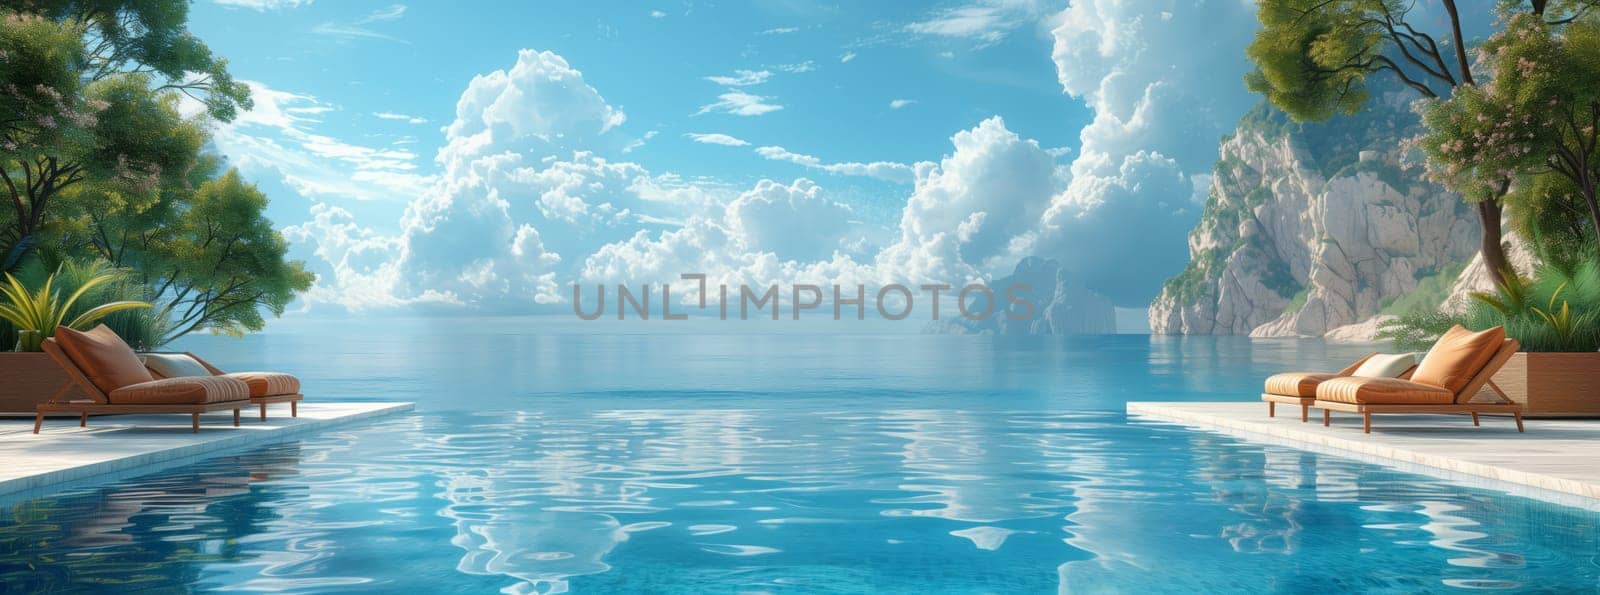 A serene swimming pool with chairs and trees, overlooking the ocean. The blue sky, fluffy white clouds, and natural landscape create a perfect place for travel and leisure